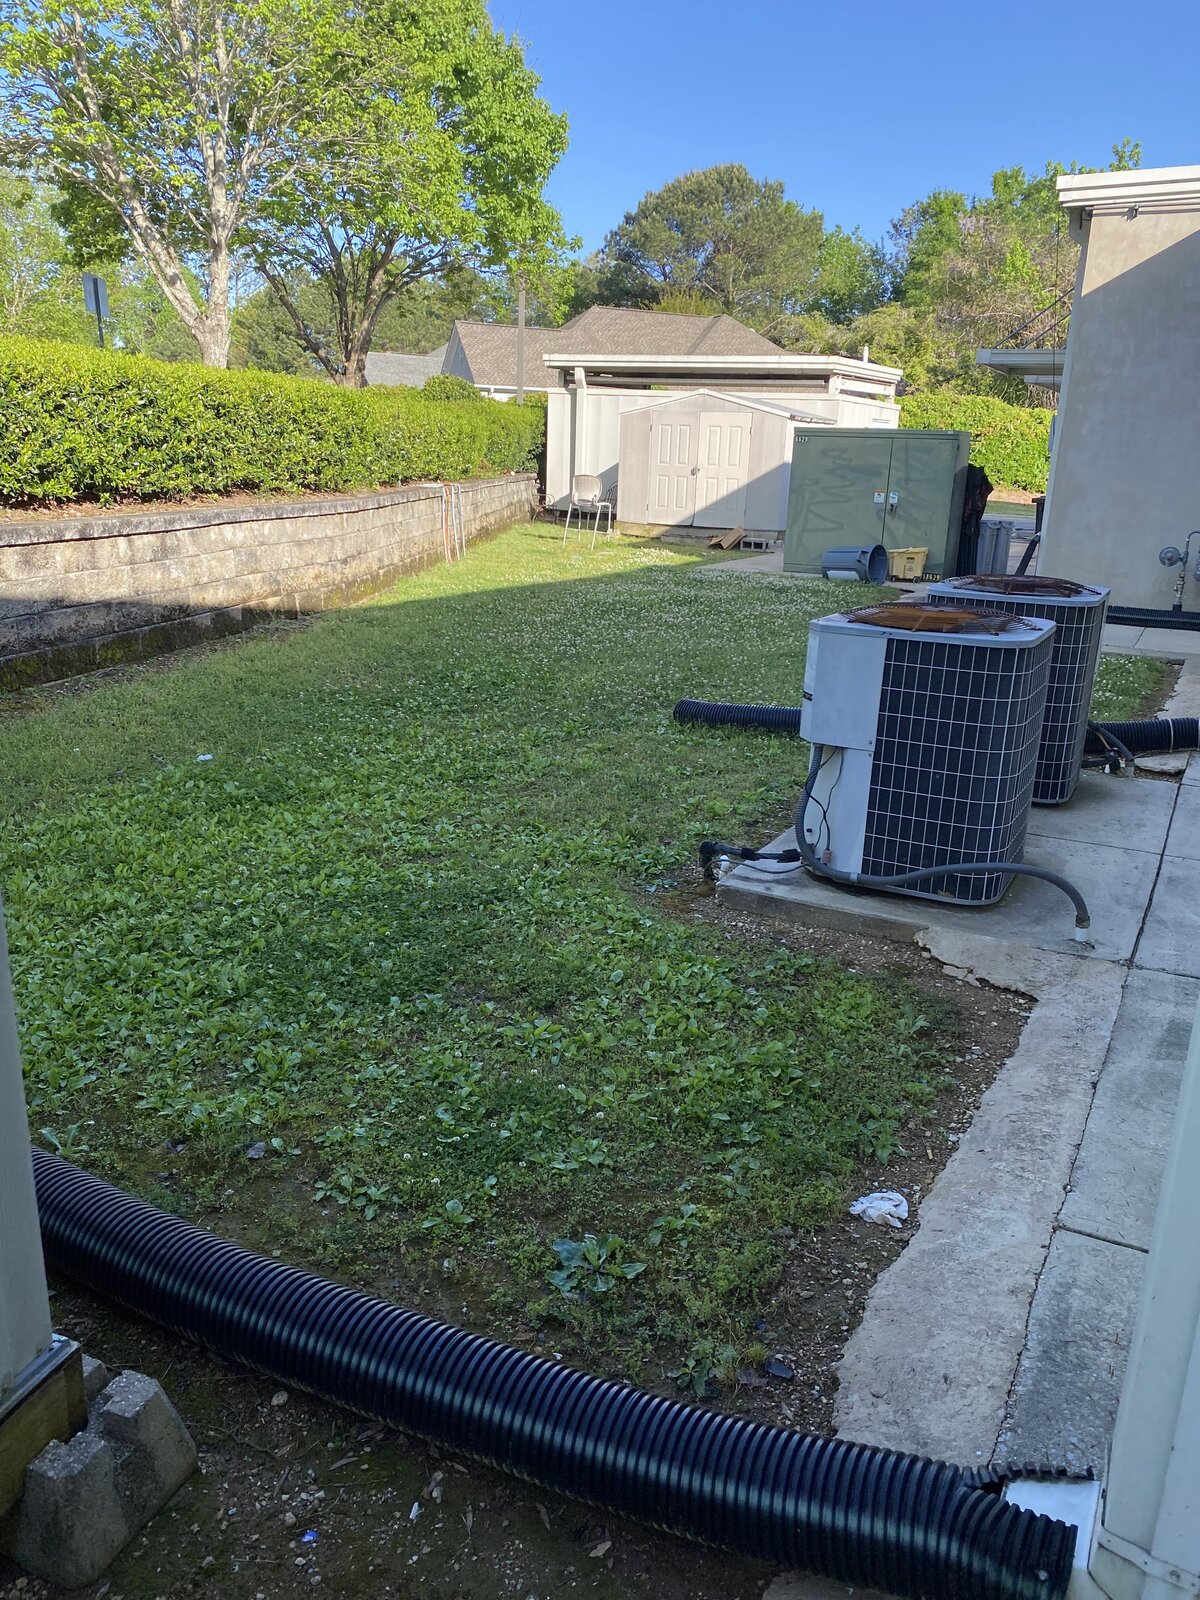 drainage-hose-next-to-air-conditioning-unit-in-grassy-backyard